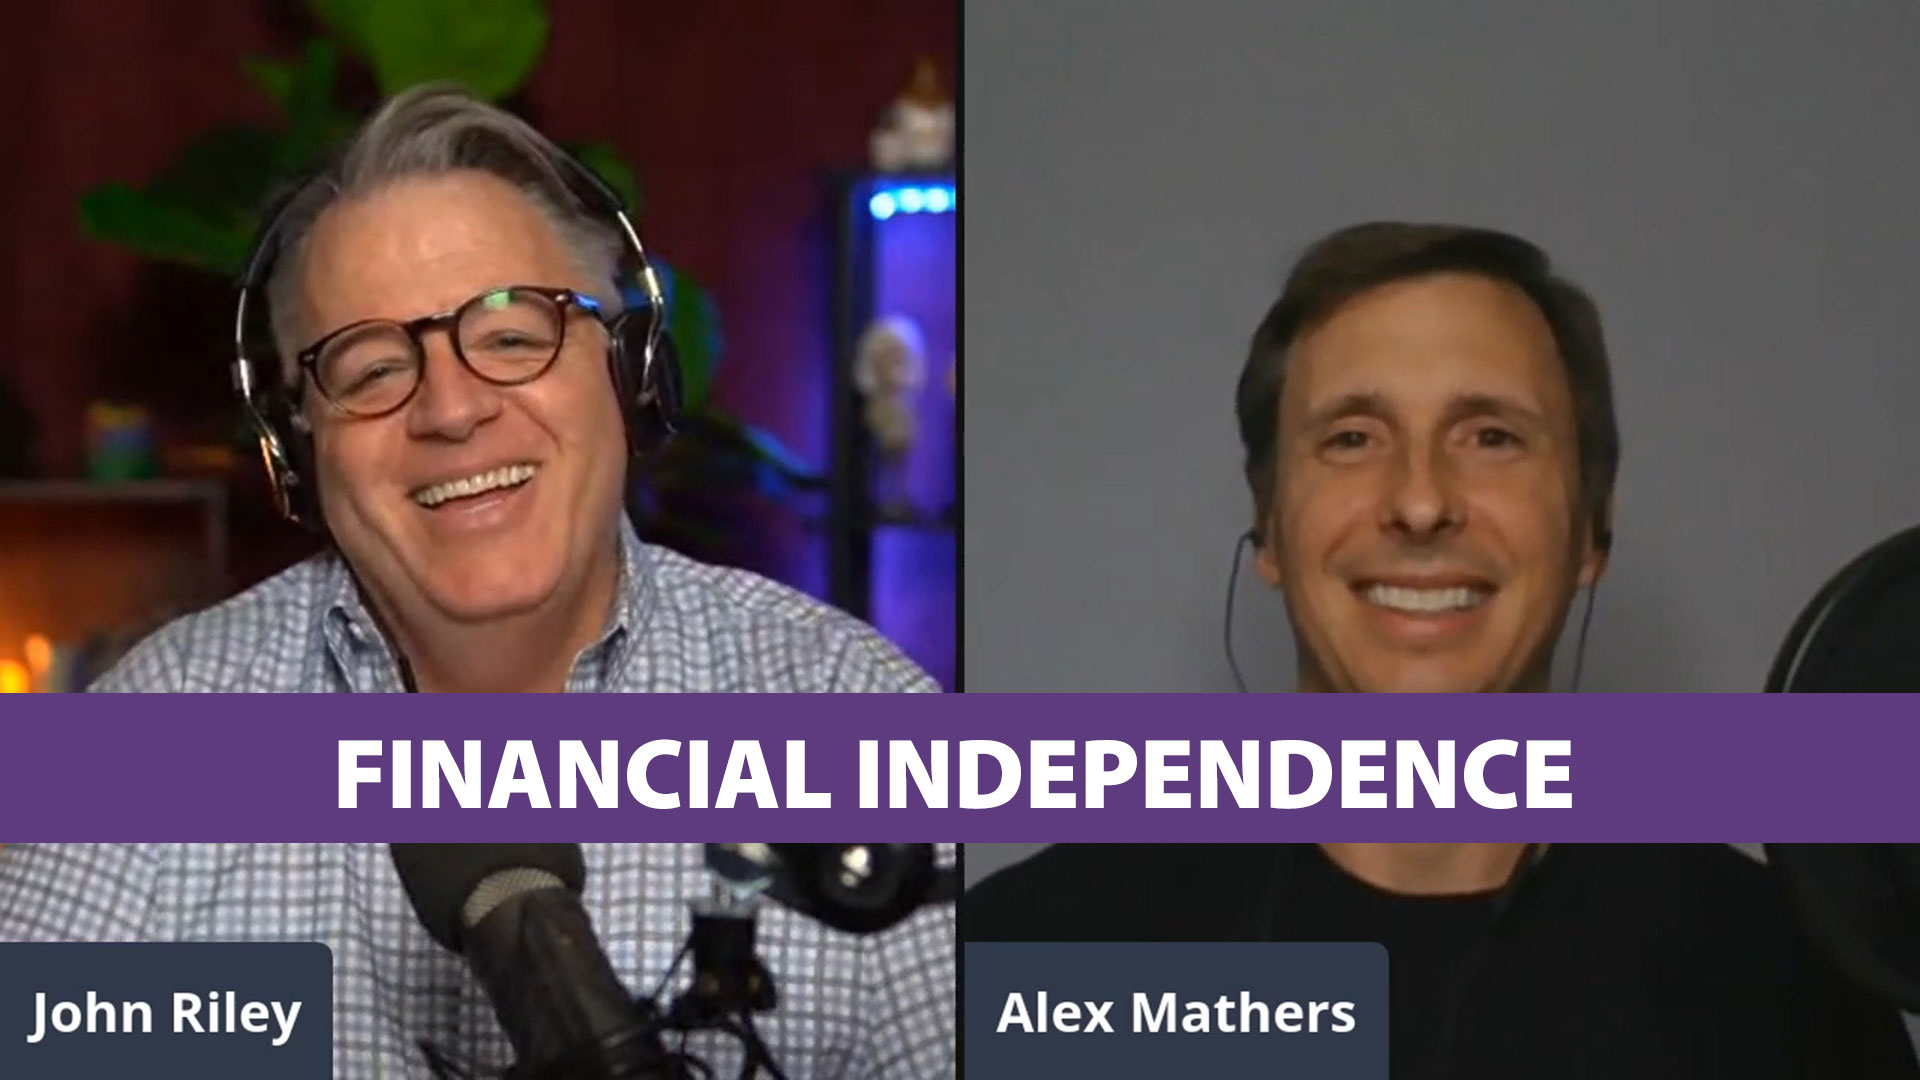 financial independence, right mind set, alex mathers, john riley project, jrp1082